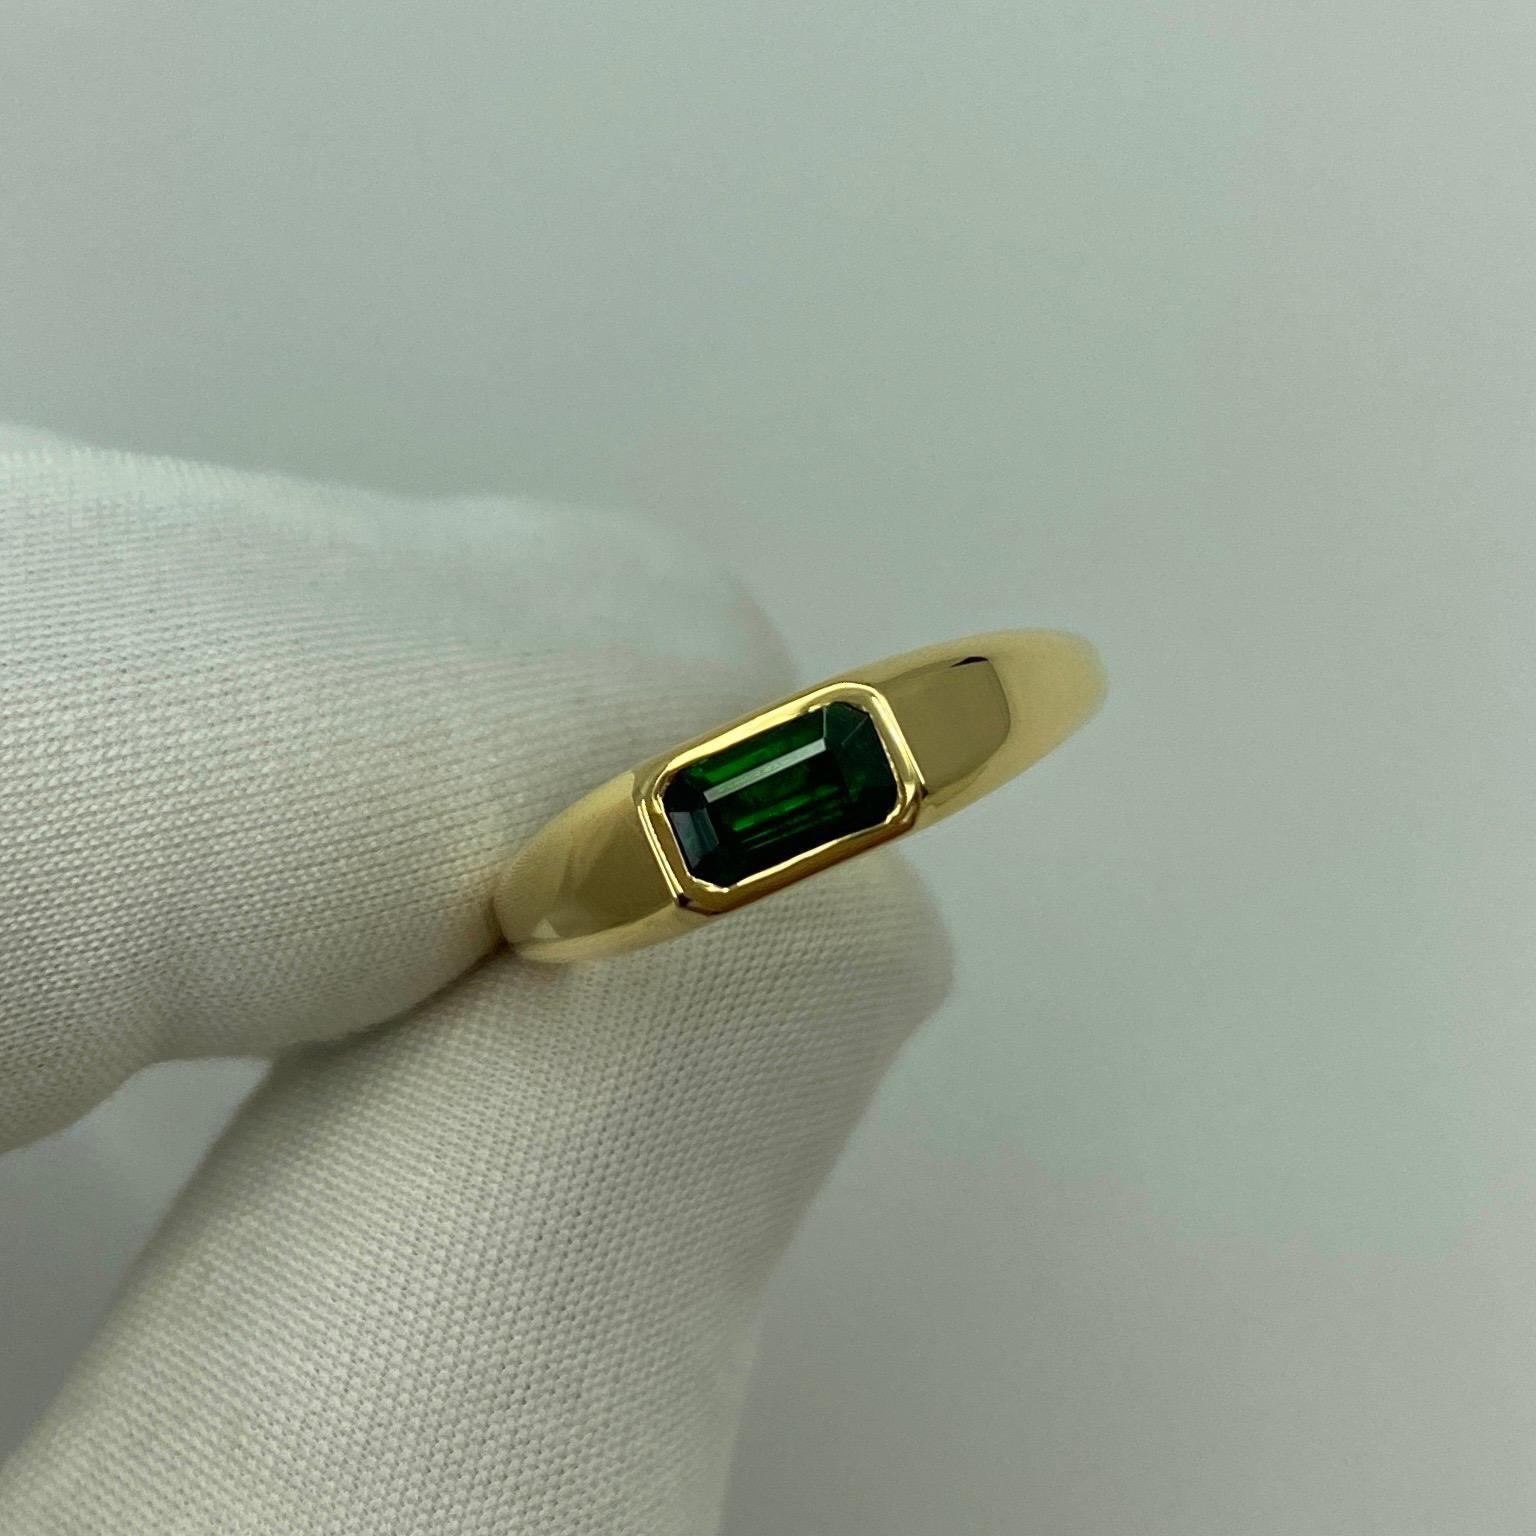 ITSIT Designed Vivid Green Tsavorite Garnet 18k Yellow Gold Ring.

Stunning 0.75 Carat tsavorite garnet with a beautiful vivid green colour and an excellent emerald cut. Also has very good clarity, rare and top quality stone with only some small